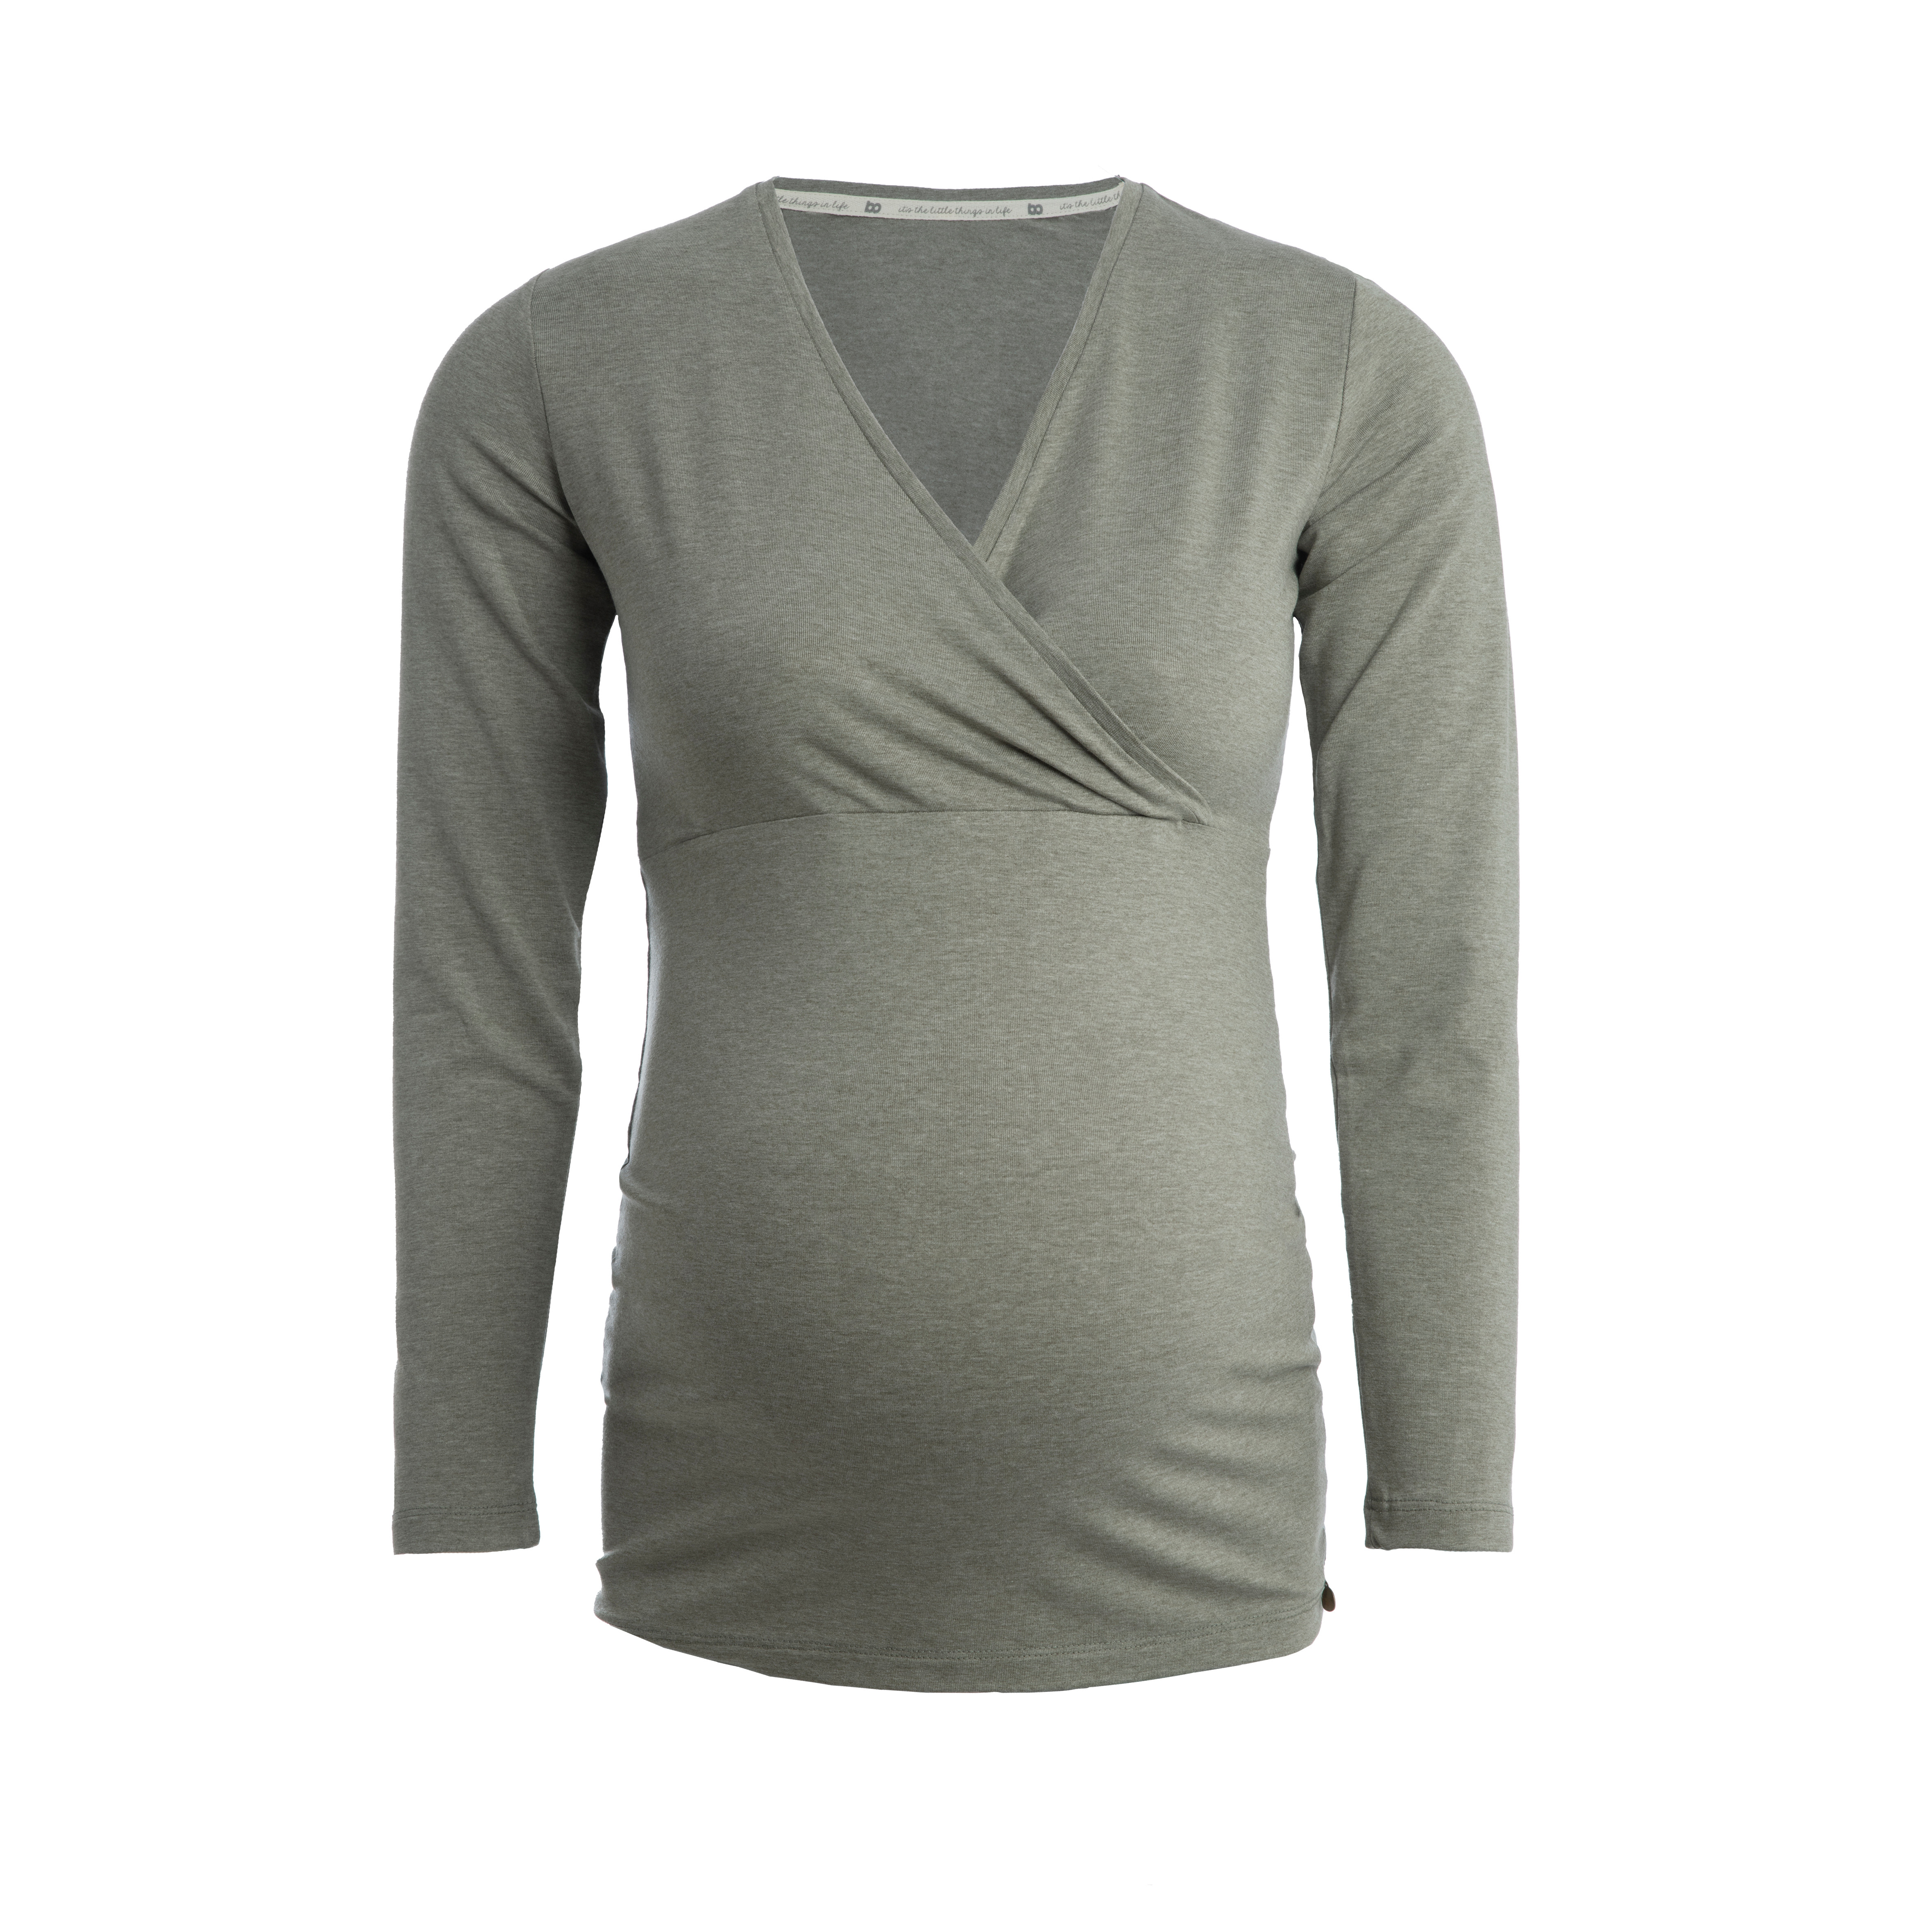 Maternity long sleeve top Glow urban green - M - With nursing function